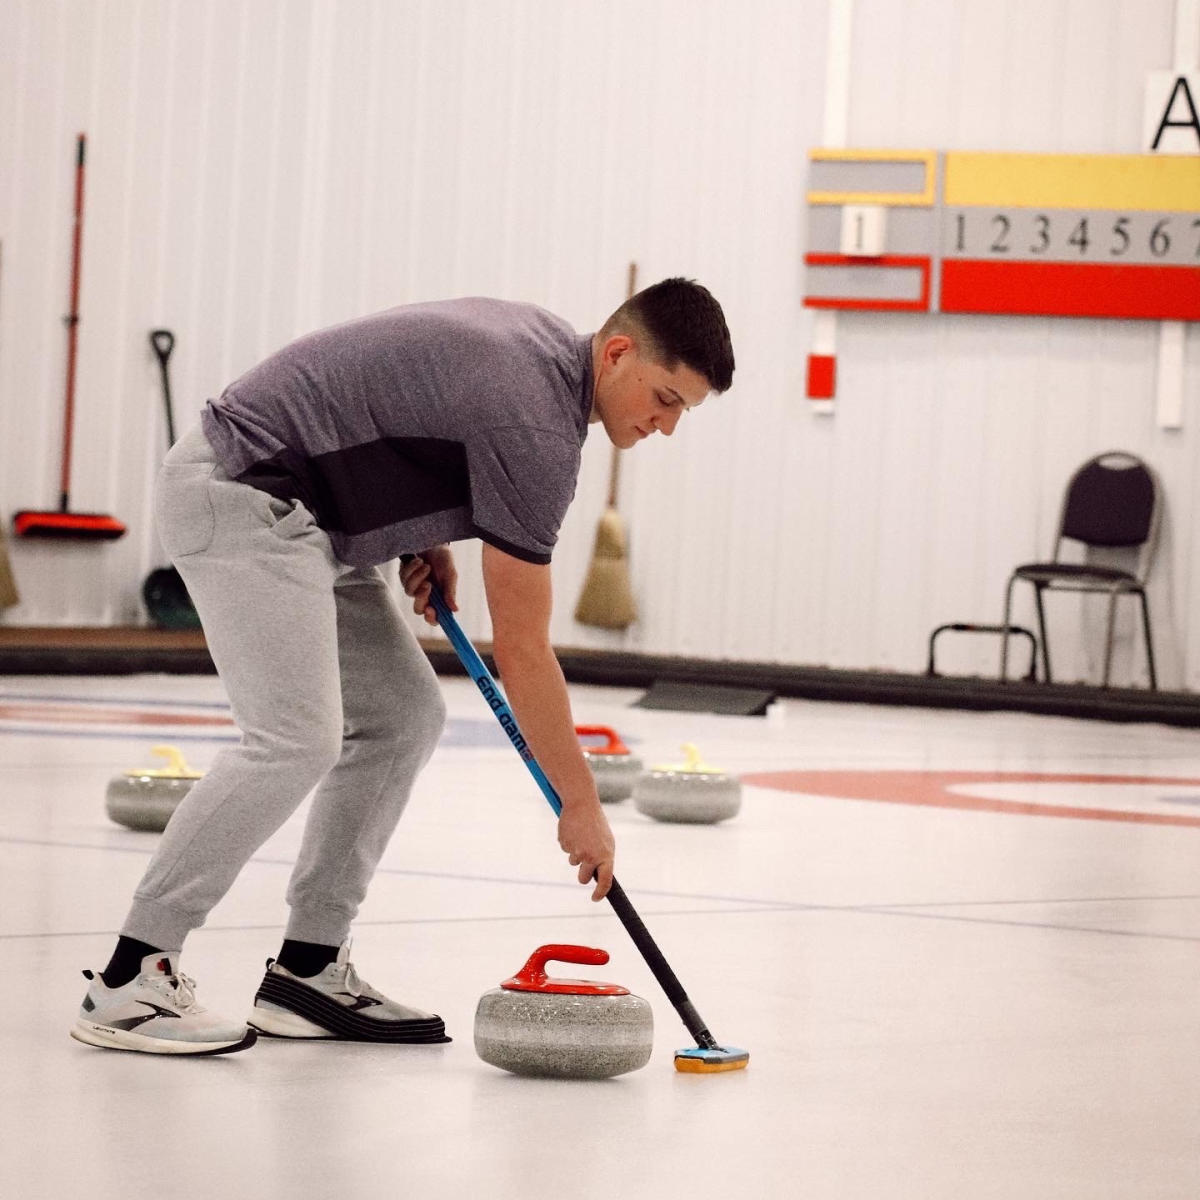 Curling in the Stevens Point Area